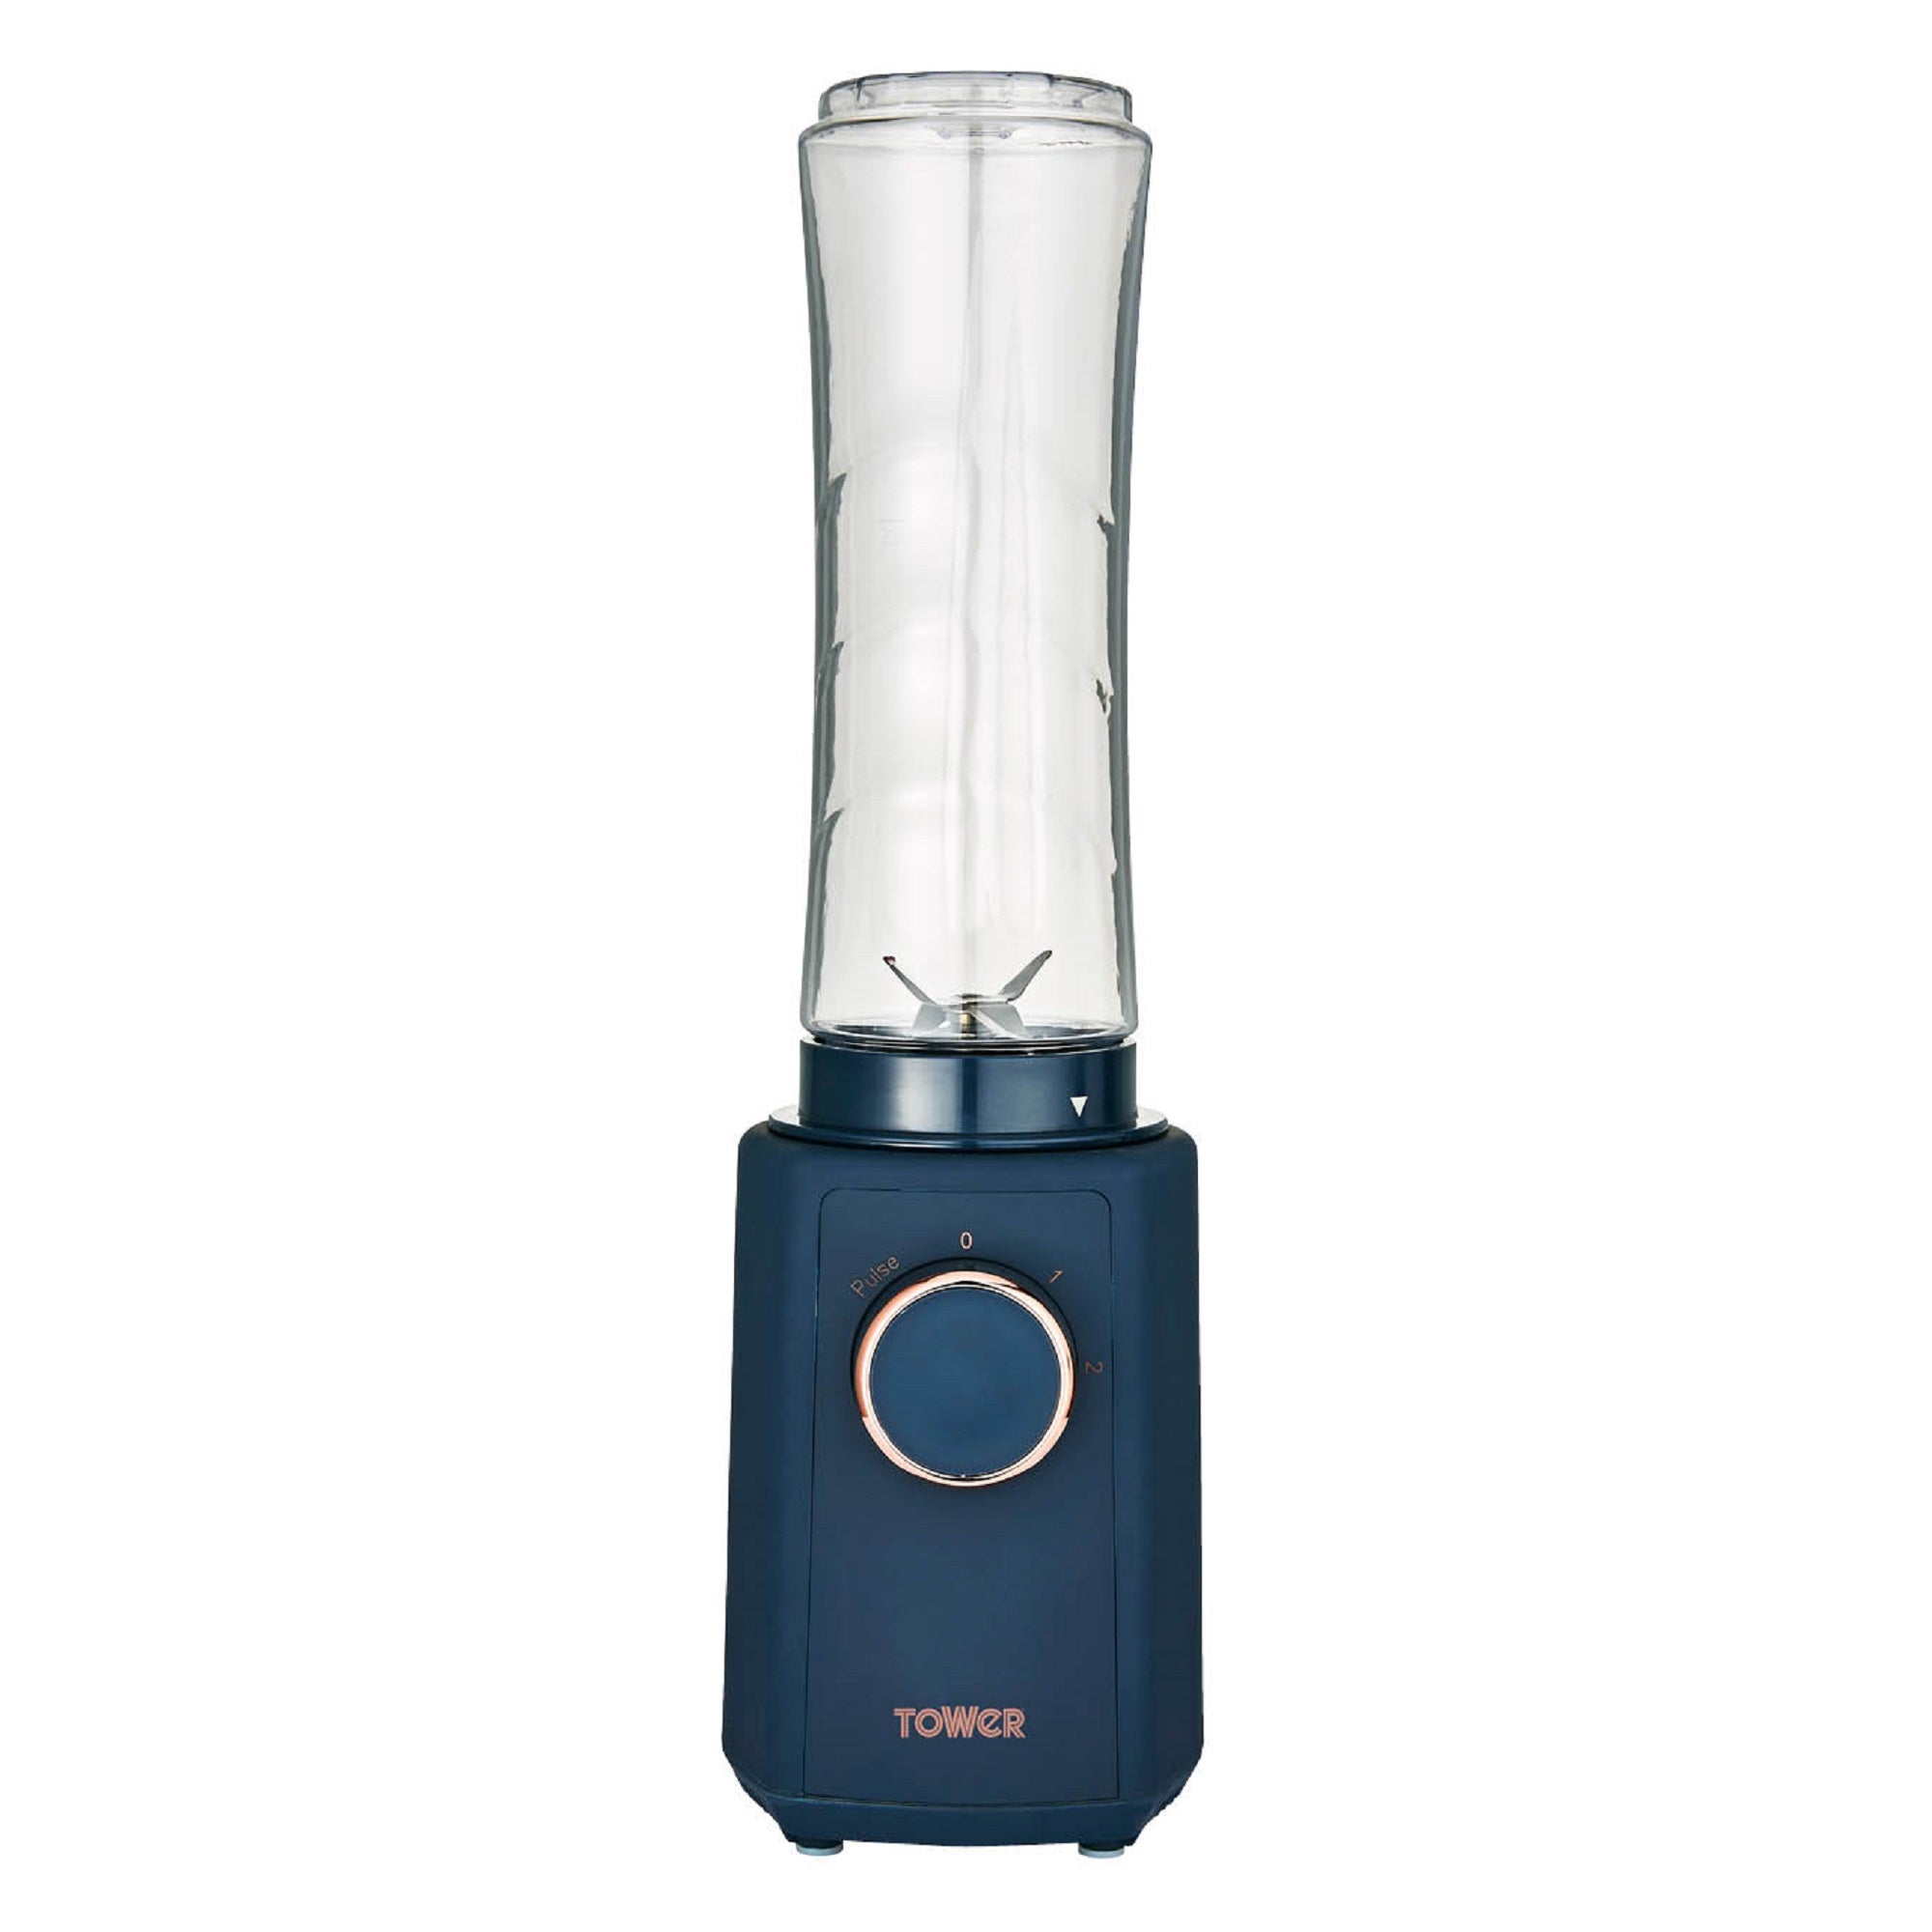 Tower Cavaletto 300W Personal Blender